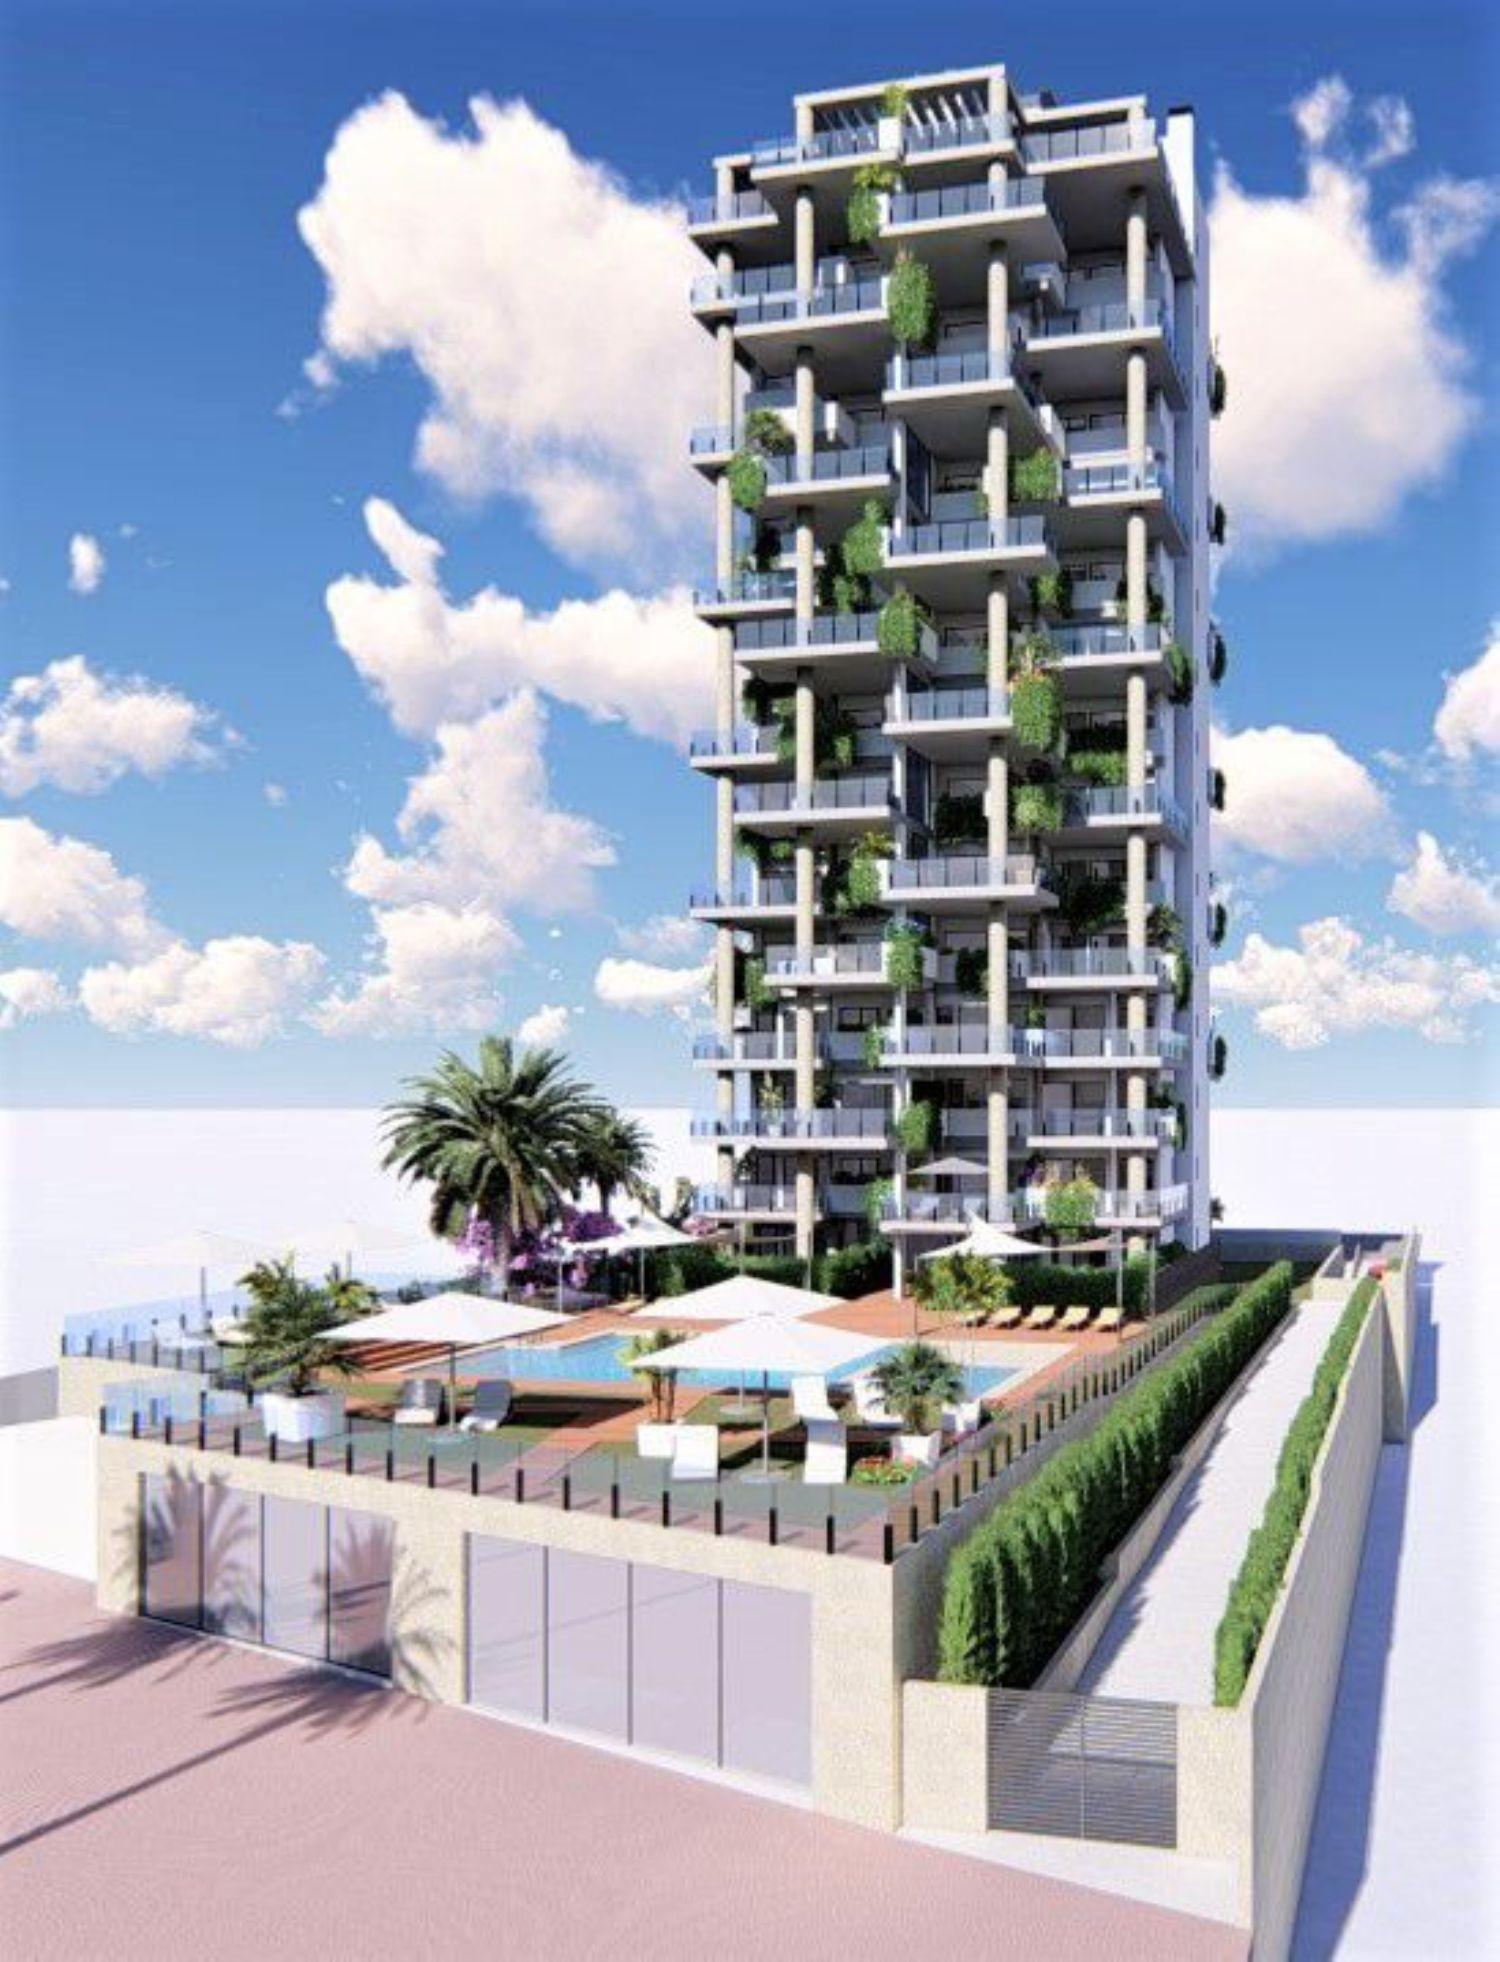 Nieuwbouwproject in Calpe.